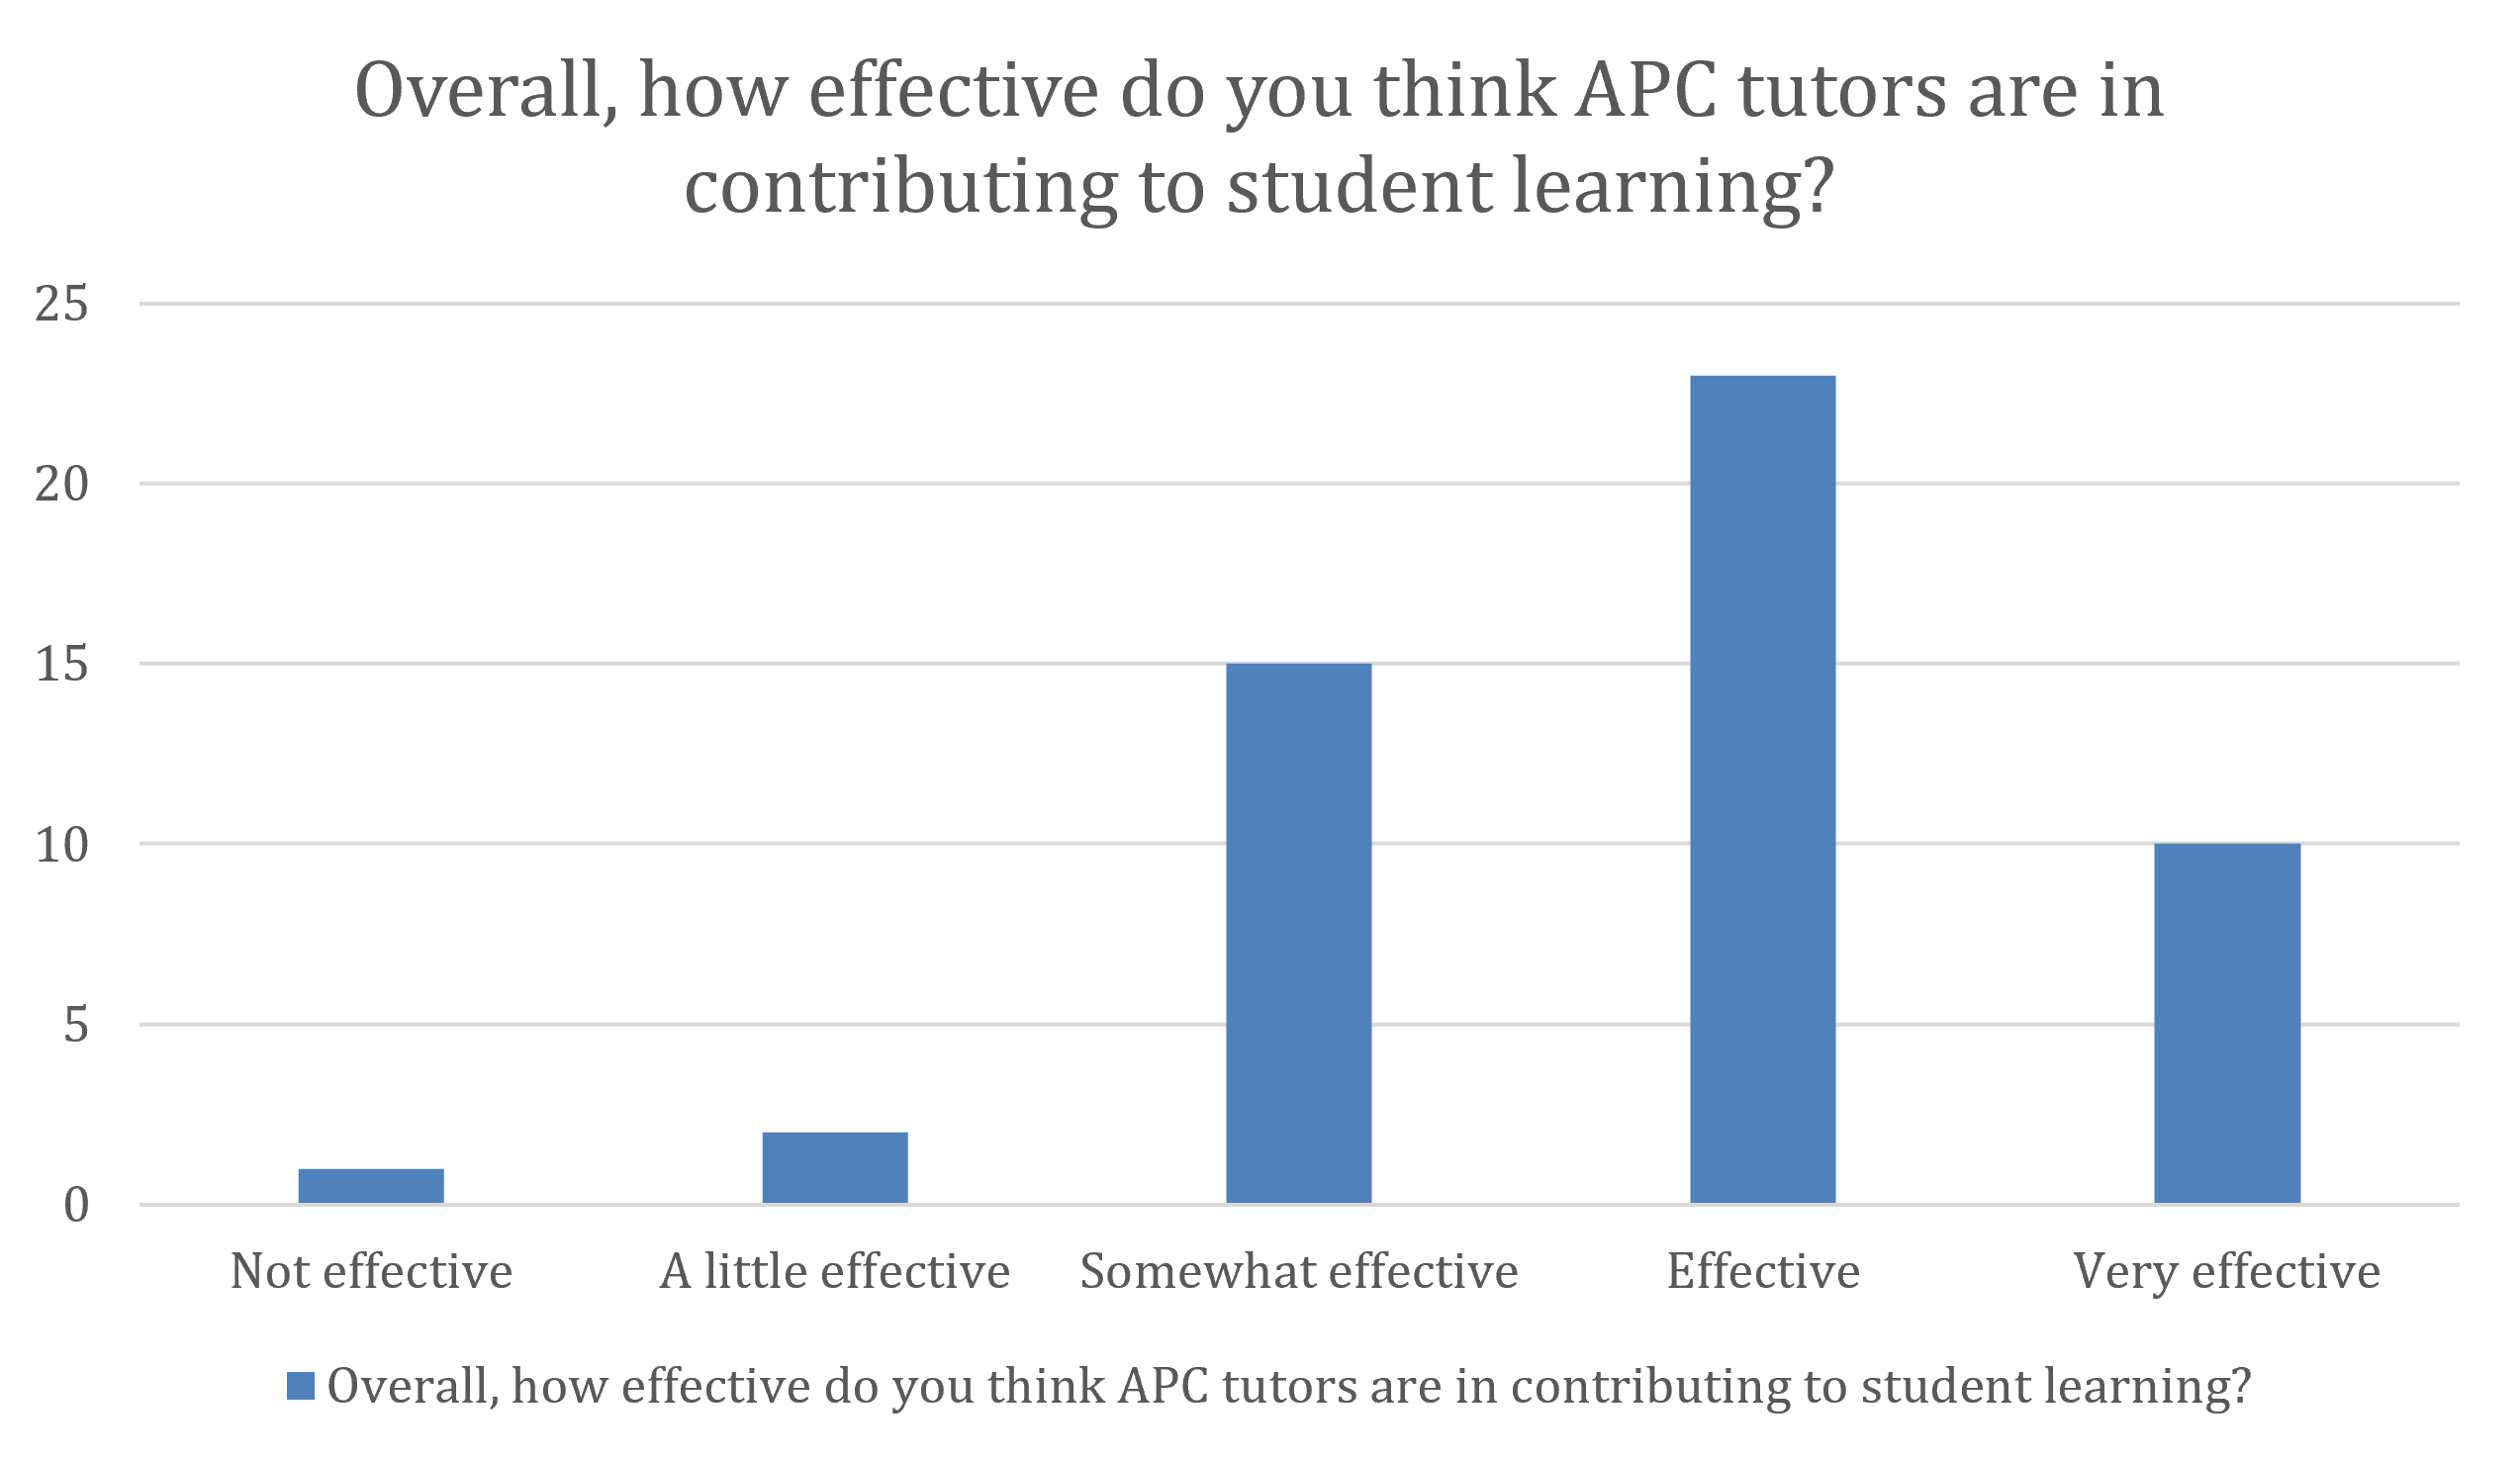 Overall, how effective do you think APC tutors are in contributing to student learning?